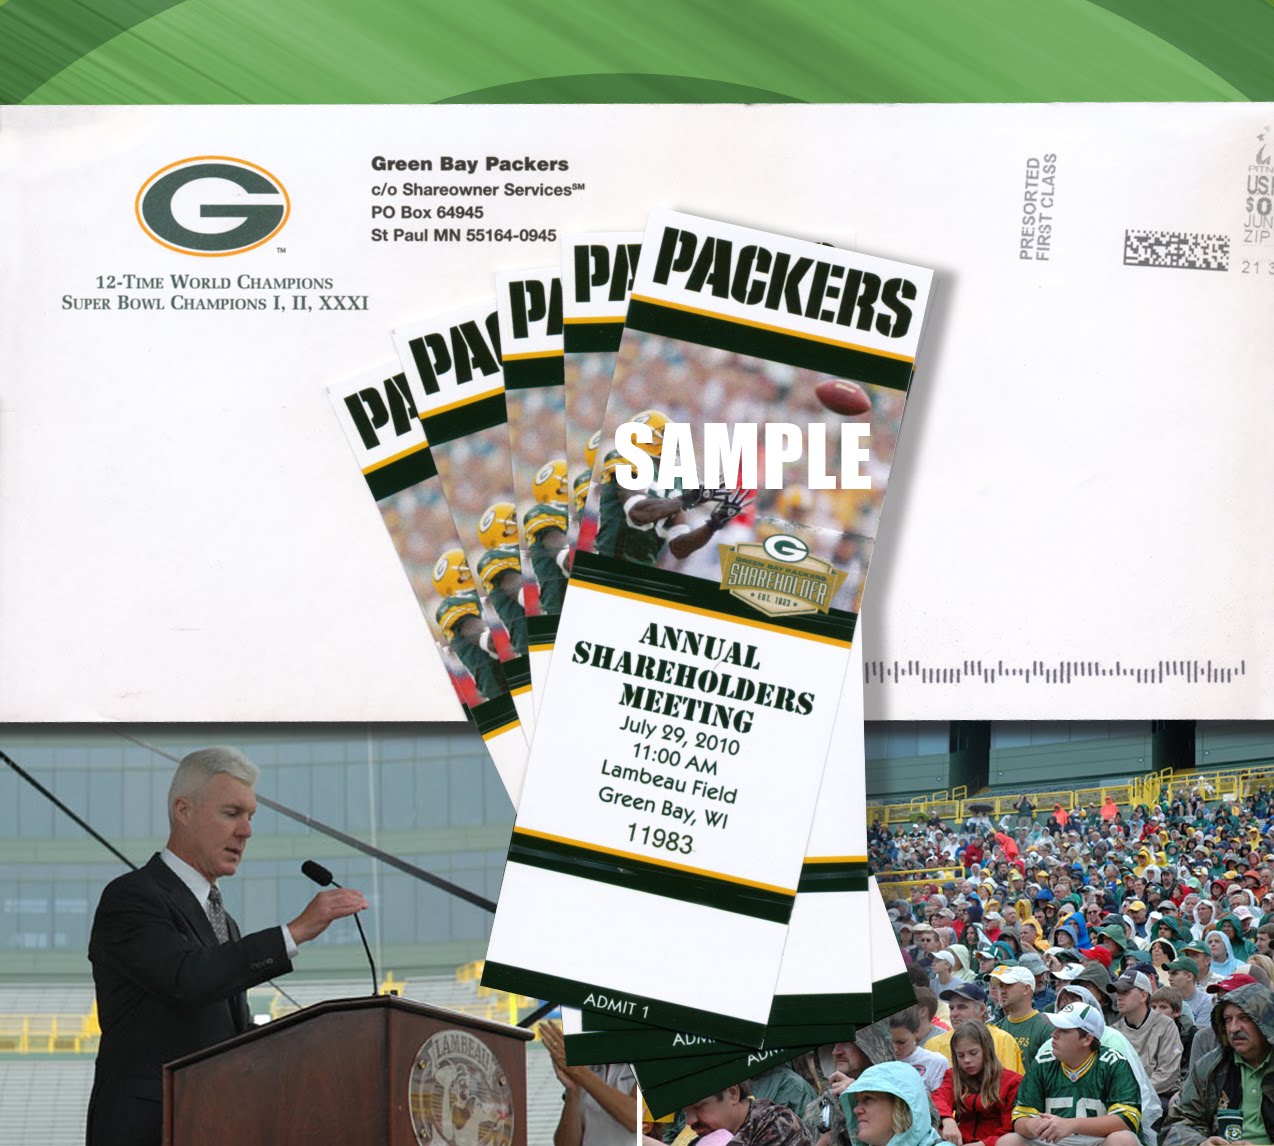 PACKERVILLE, U.S.A. Packers Shareholders Meeting